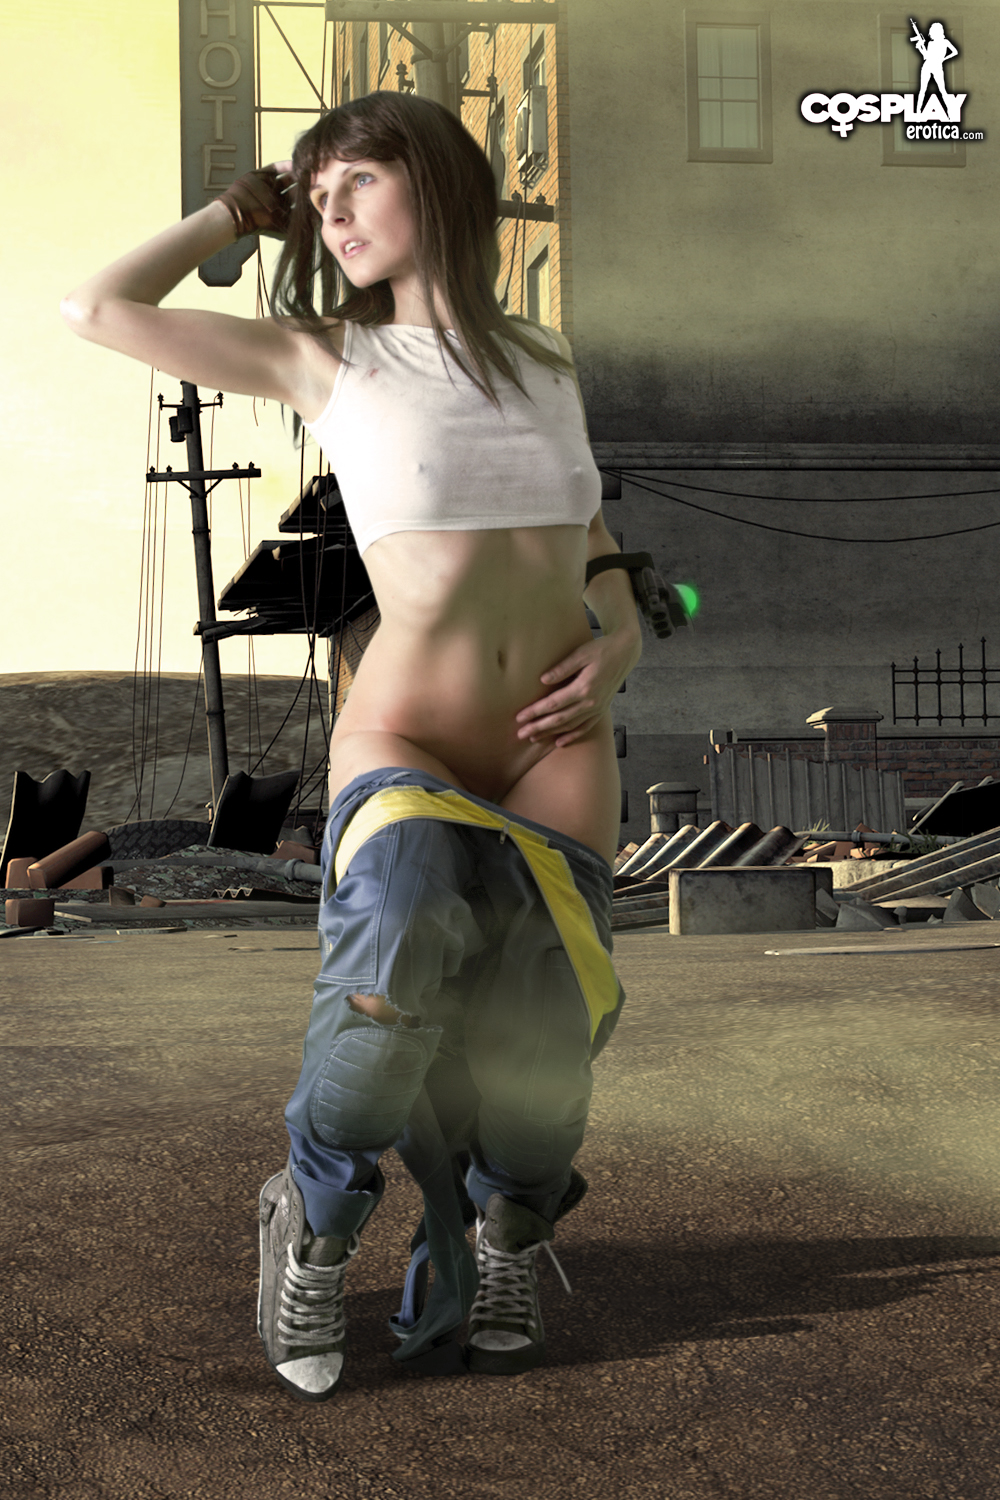 Fallout 3 Cosplay Porn - Fallout 3 | Cosplay Nudes